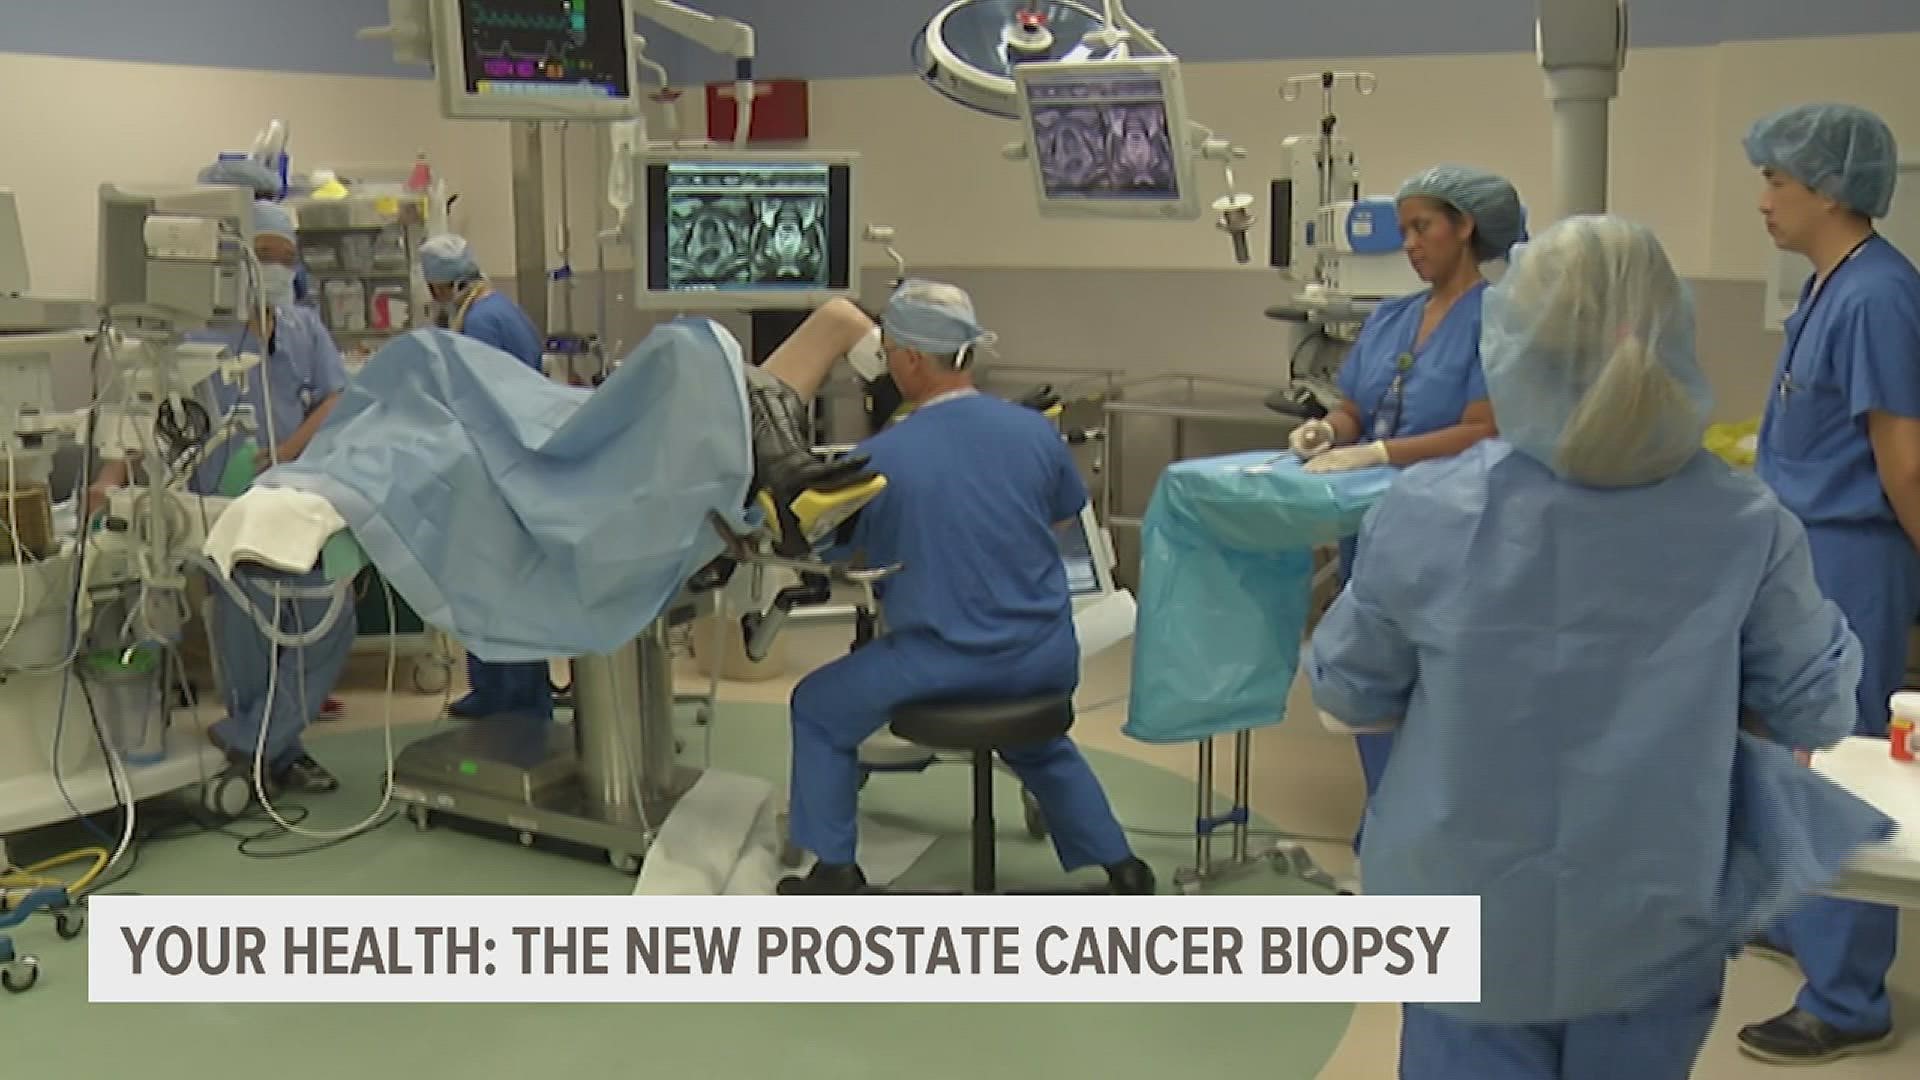 Prostate cancer can be treatable if caught early with the help of a biopsy. Now, new technology is making that procedure less painful for patients.